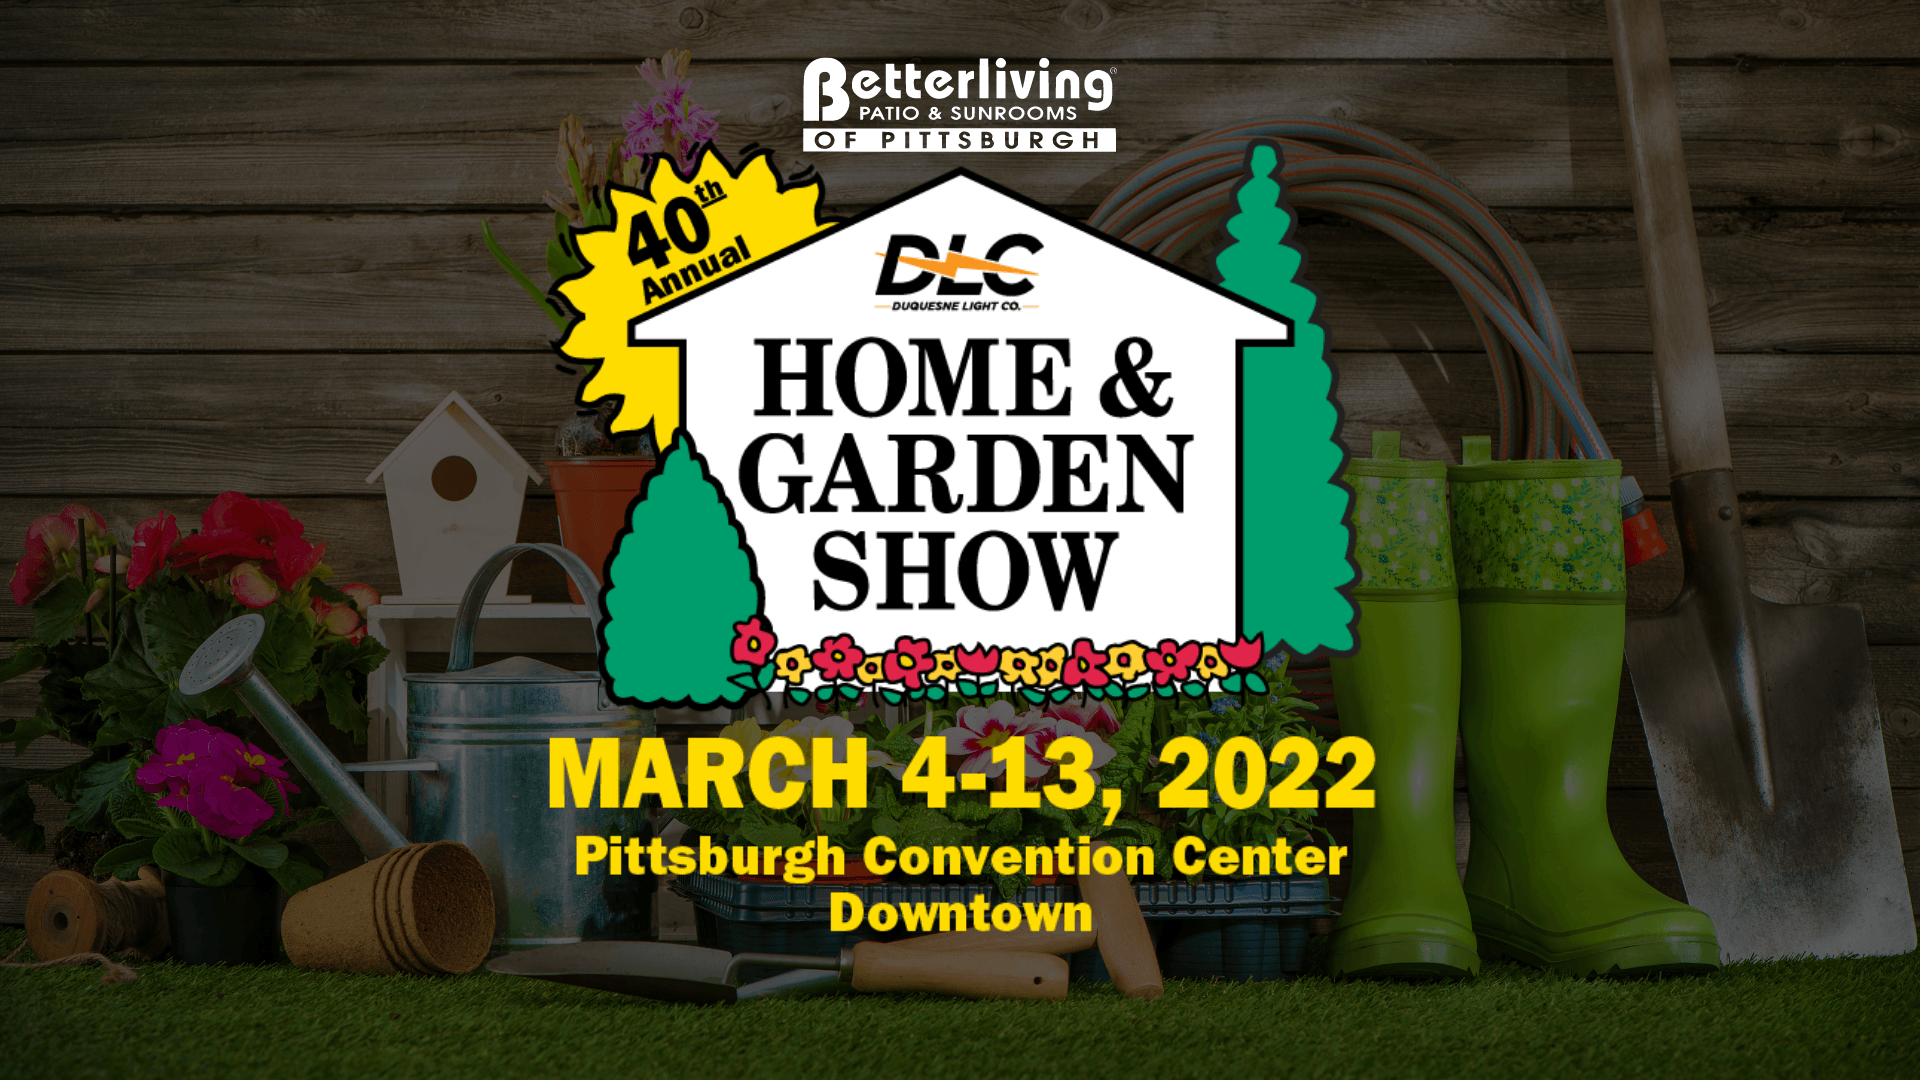 Pittsburgh Home and Garden Show with Betterliving Patio and Sunrooms of Pittsburgh